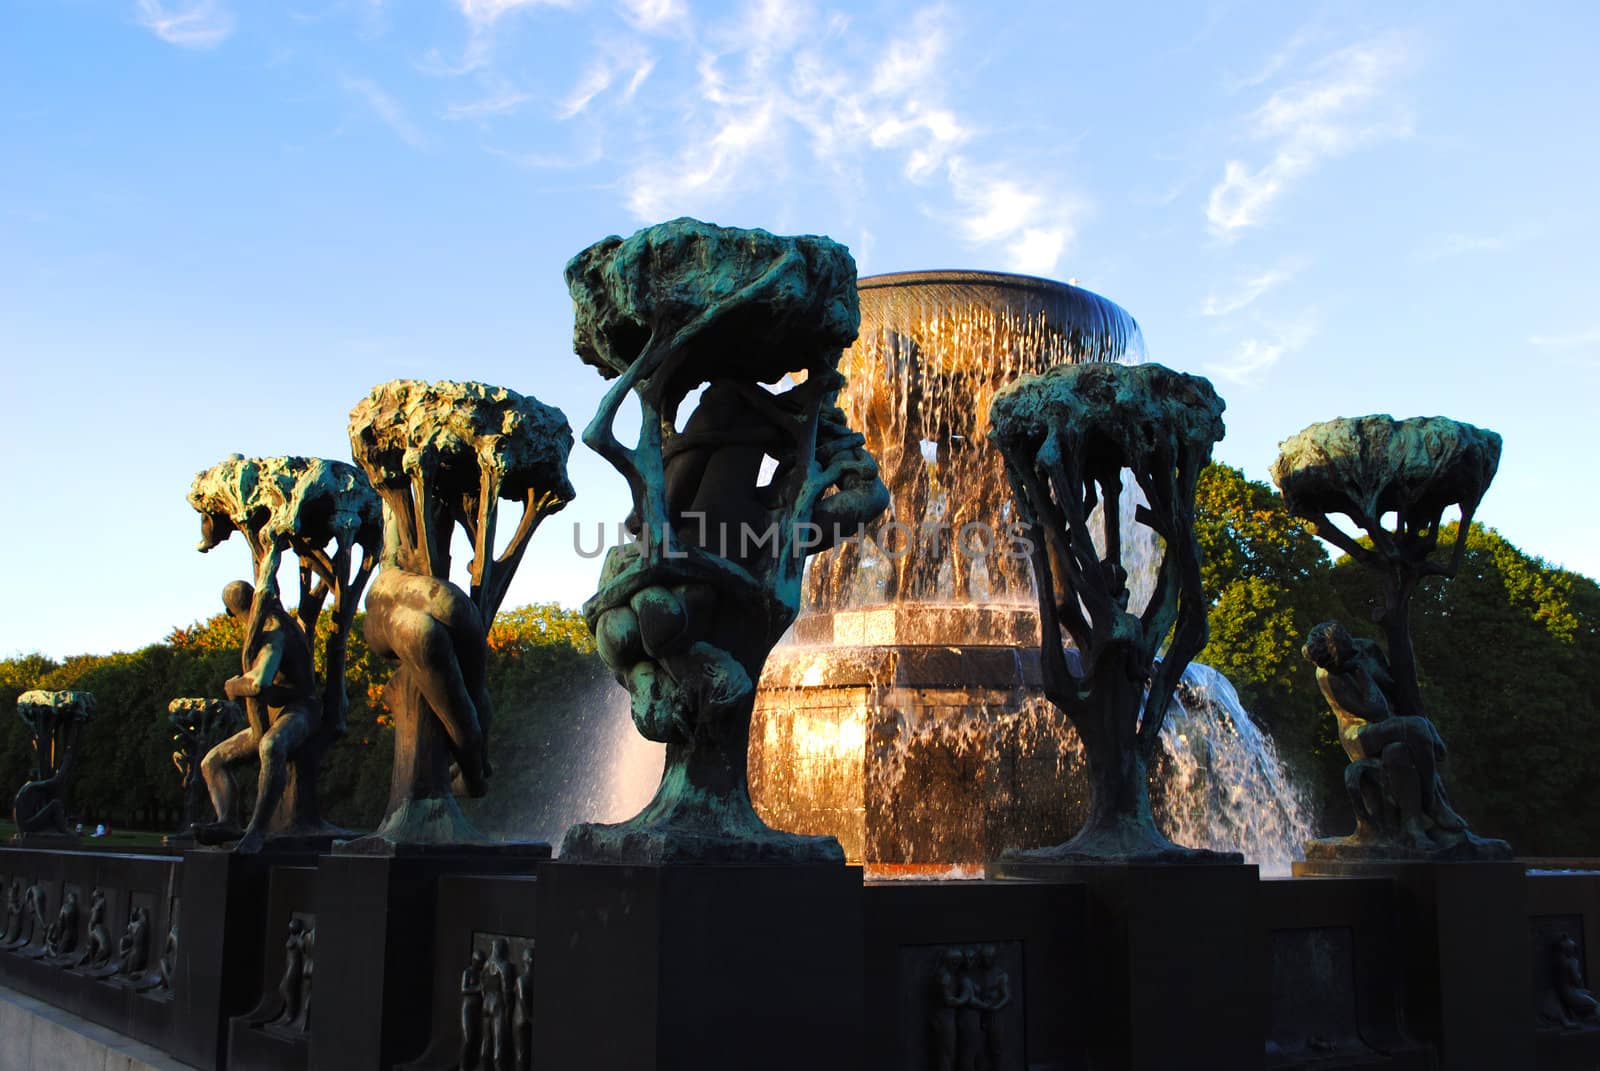 A fountain in Frogner Park (Frognerparken), a public park located in the borough of Frogner in Oslo, Norway. The park contains the world famous Vigeland Sculpture Park (Vigelandsanlegget) designed by Gustav Vigeland.